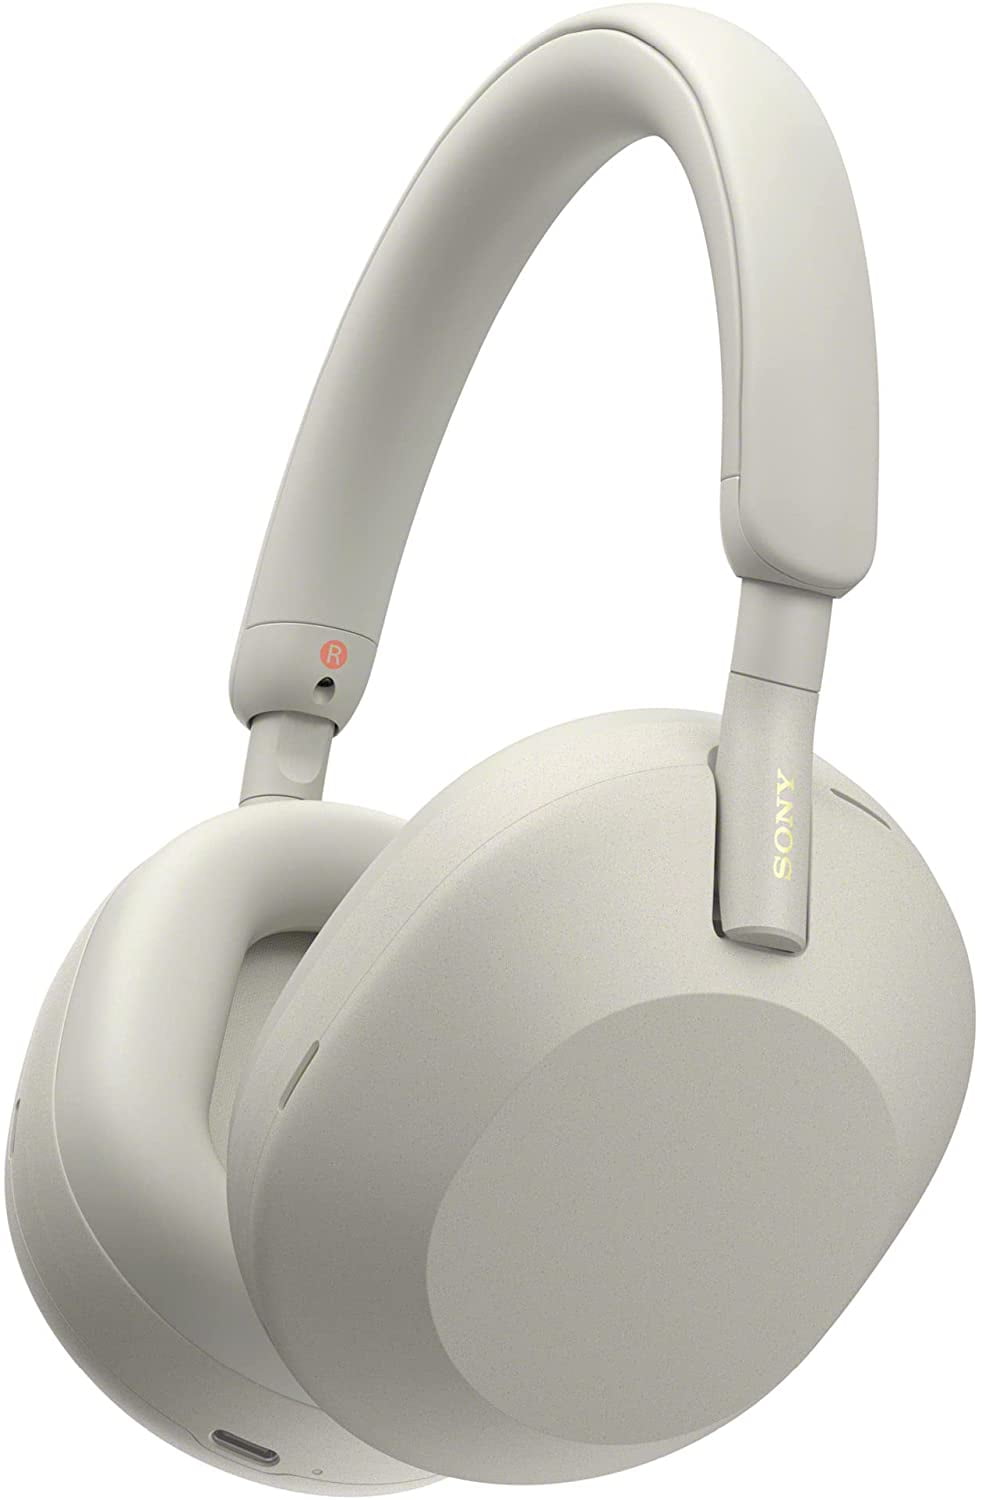 Restored Sony WH1000XM5/S Wireless Industry Leading Noise Canceling Bluetooth Headphones (Refurbished)